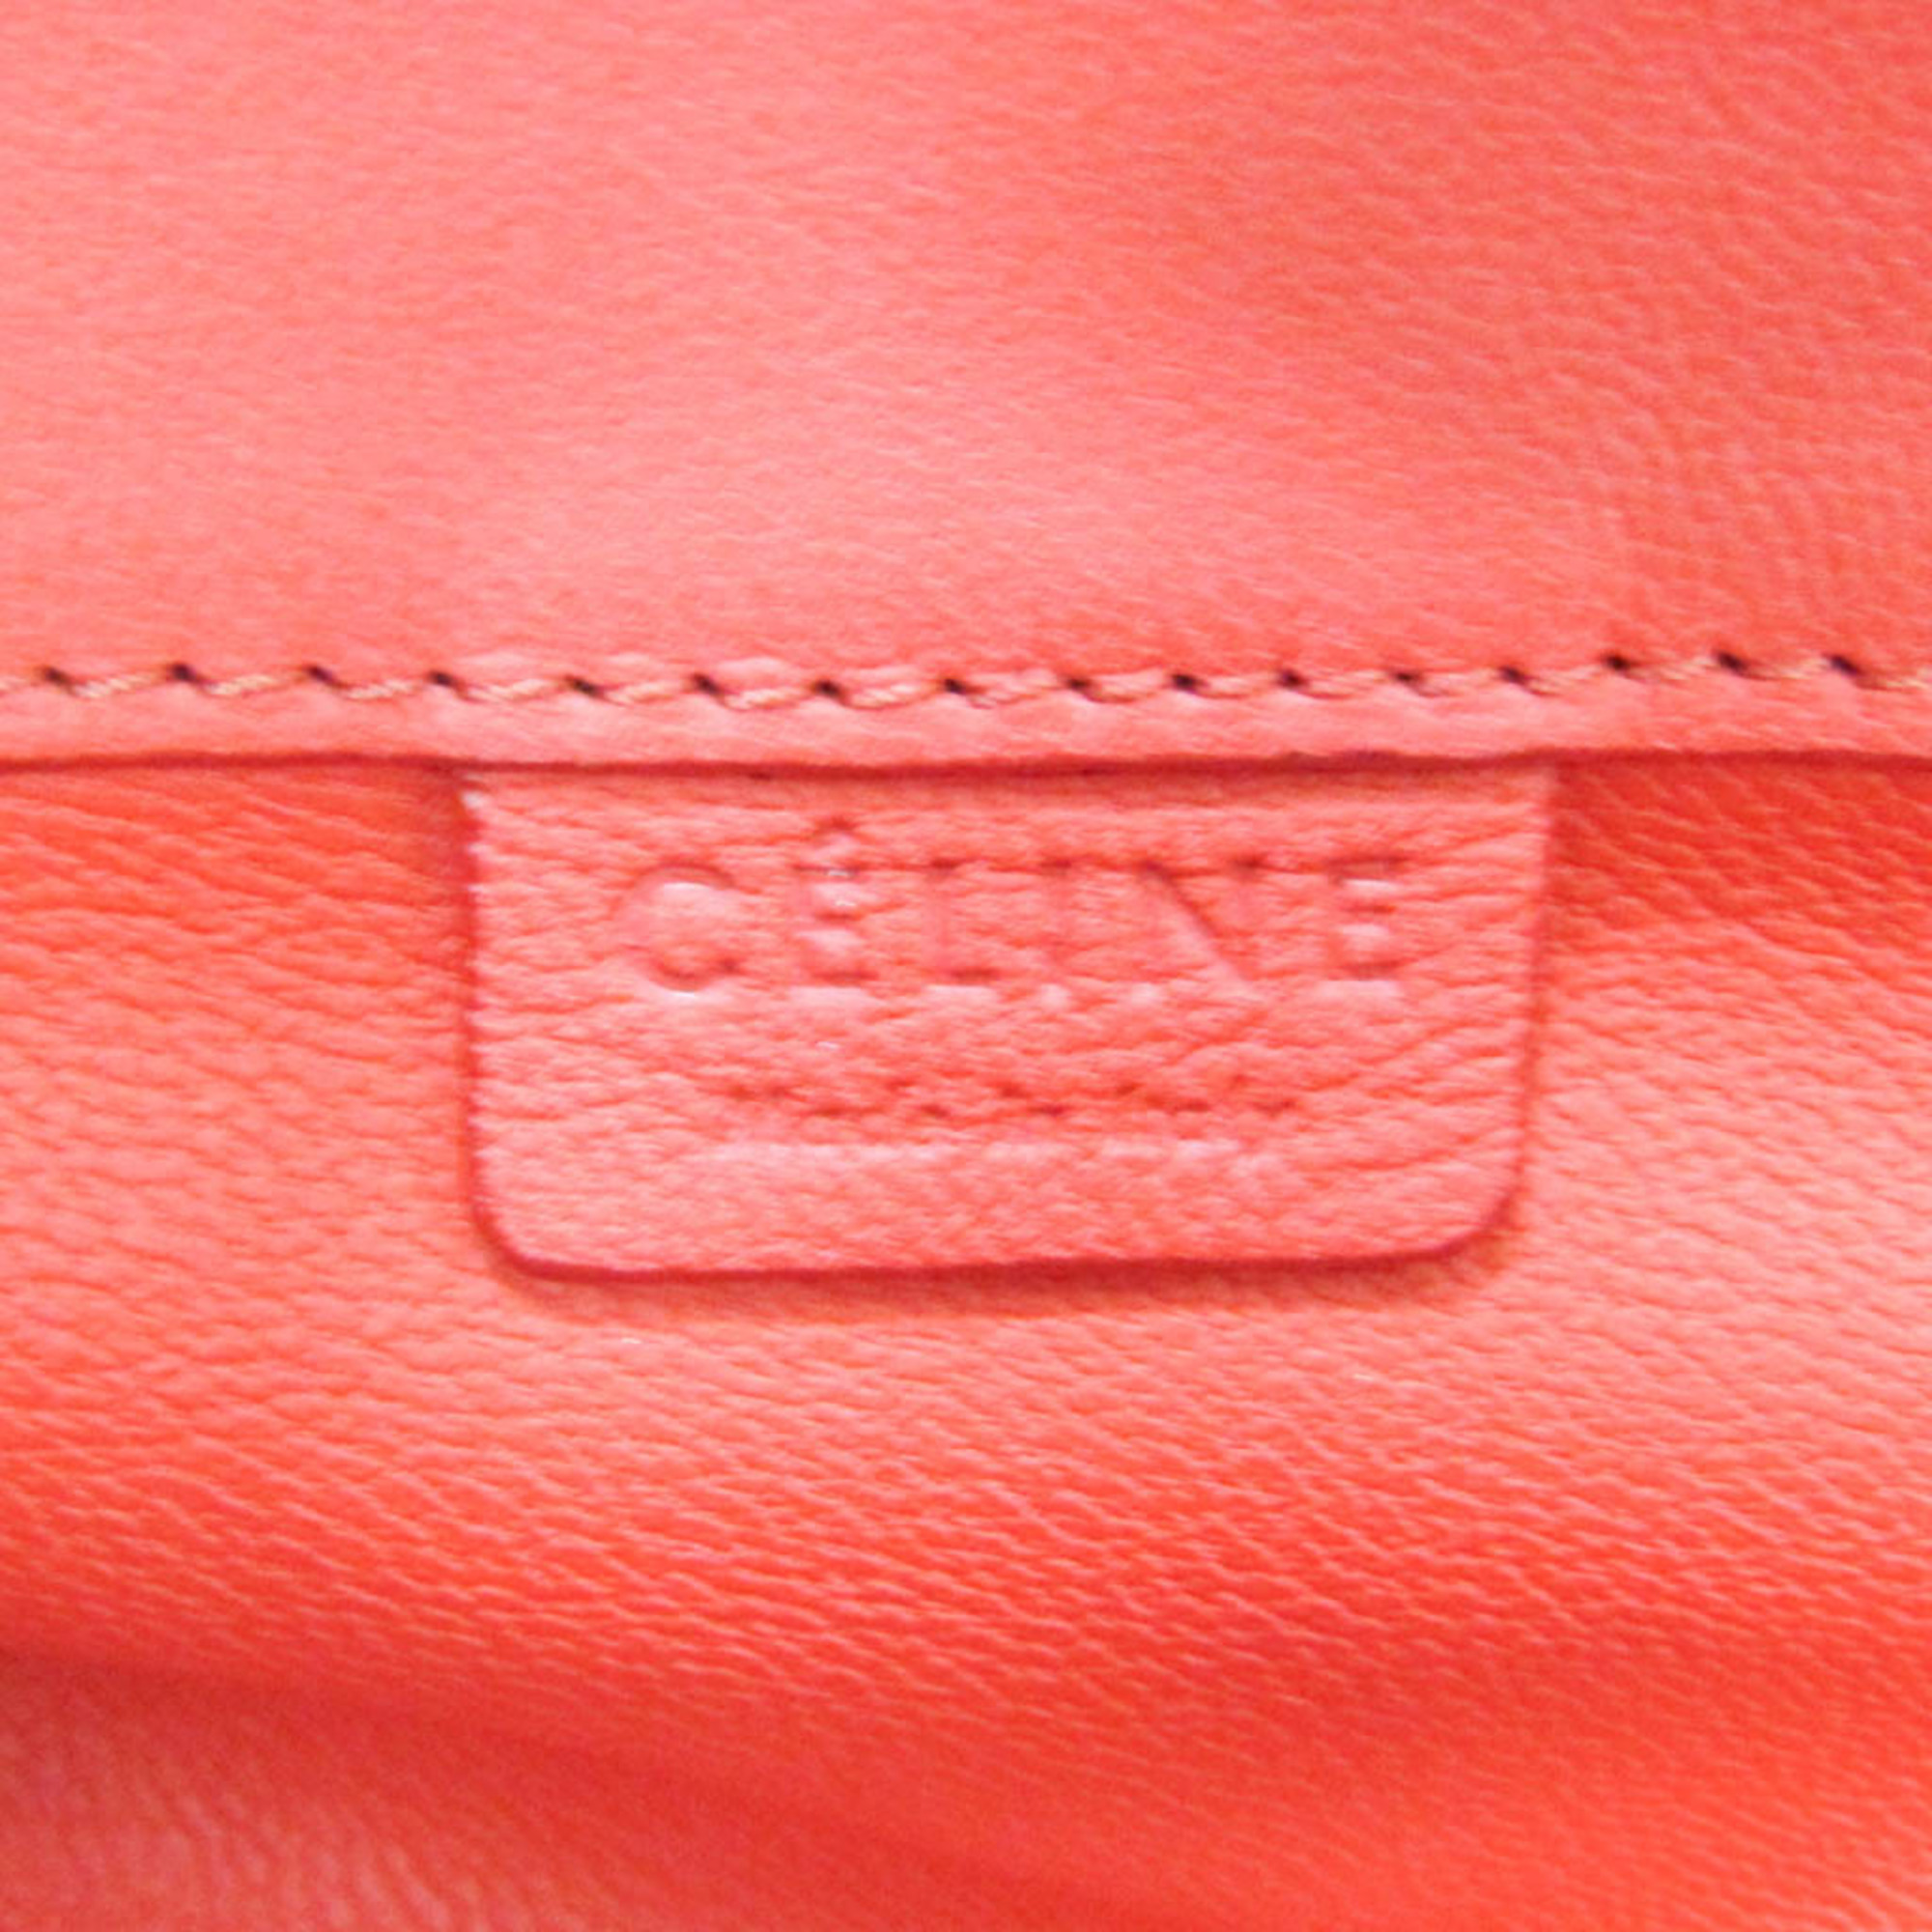 Celine Small Horizontal Women's Leather Tote Bag Pink Red